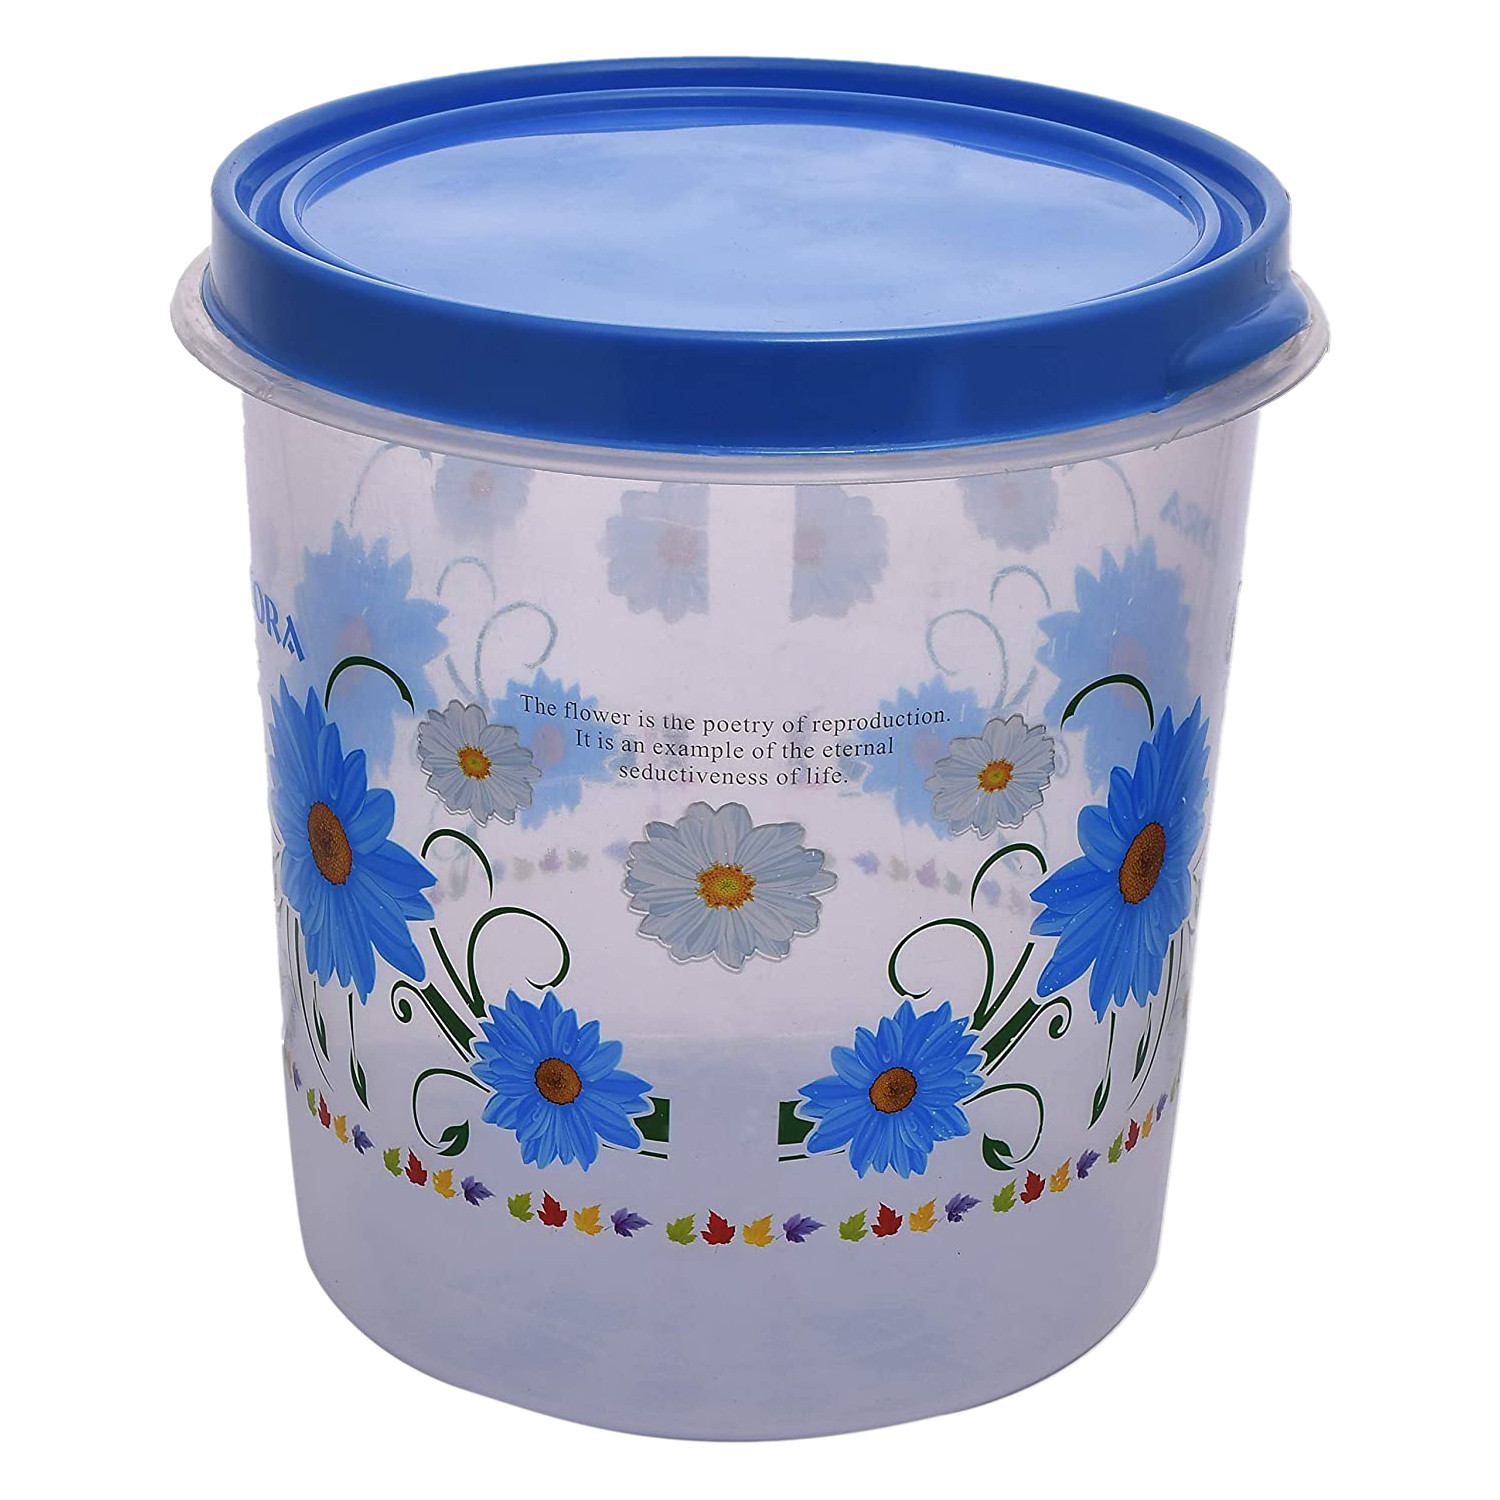 Kuber Industries Storage Container|Durable Plastic Floral Design BPA Free Food Kitchen Organizer With Lid|Food Utility Jar, 16 Ltr (Blue)